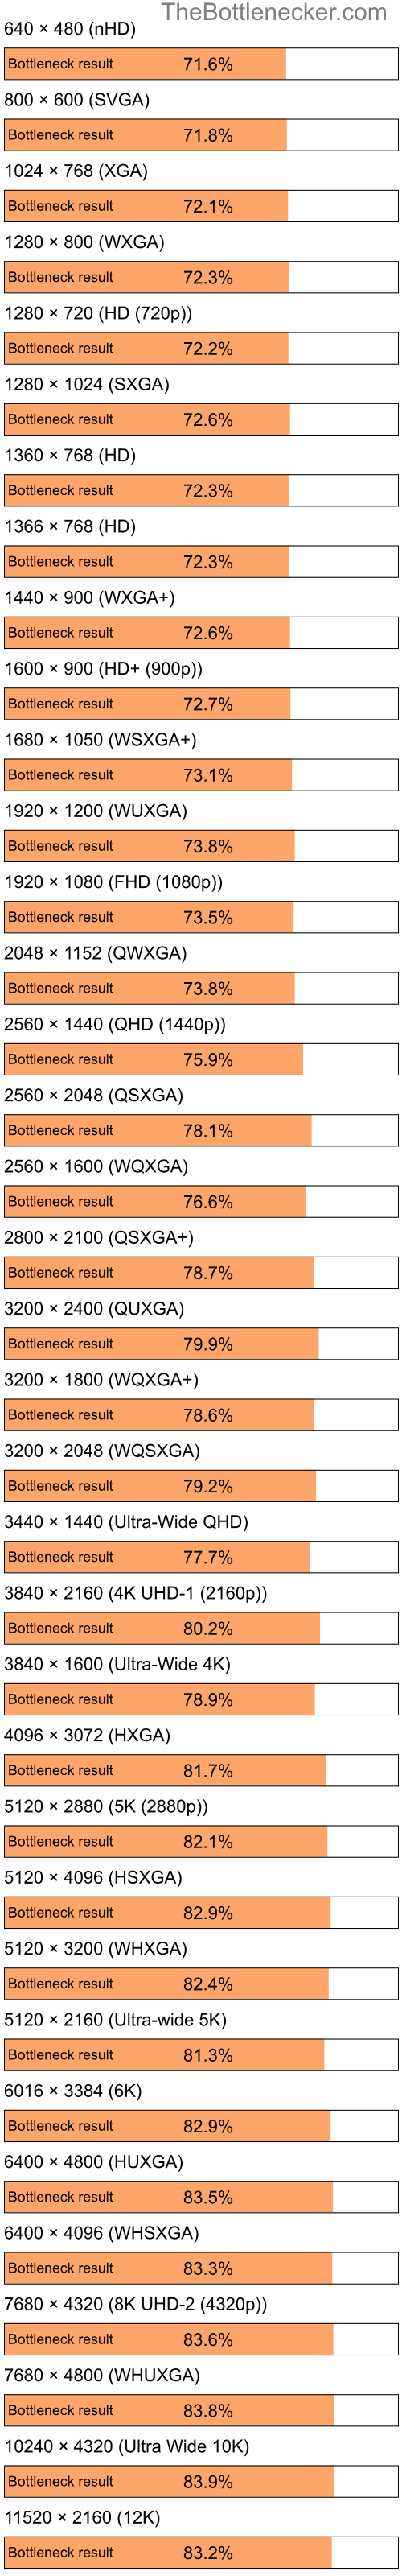 Bottleneck results by resolution for Intel Pentium 4 and NVIDIA Quadro FX 540 in Graphic Card Intense Tasks